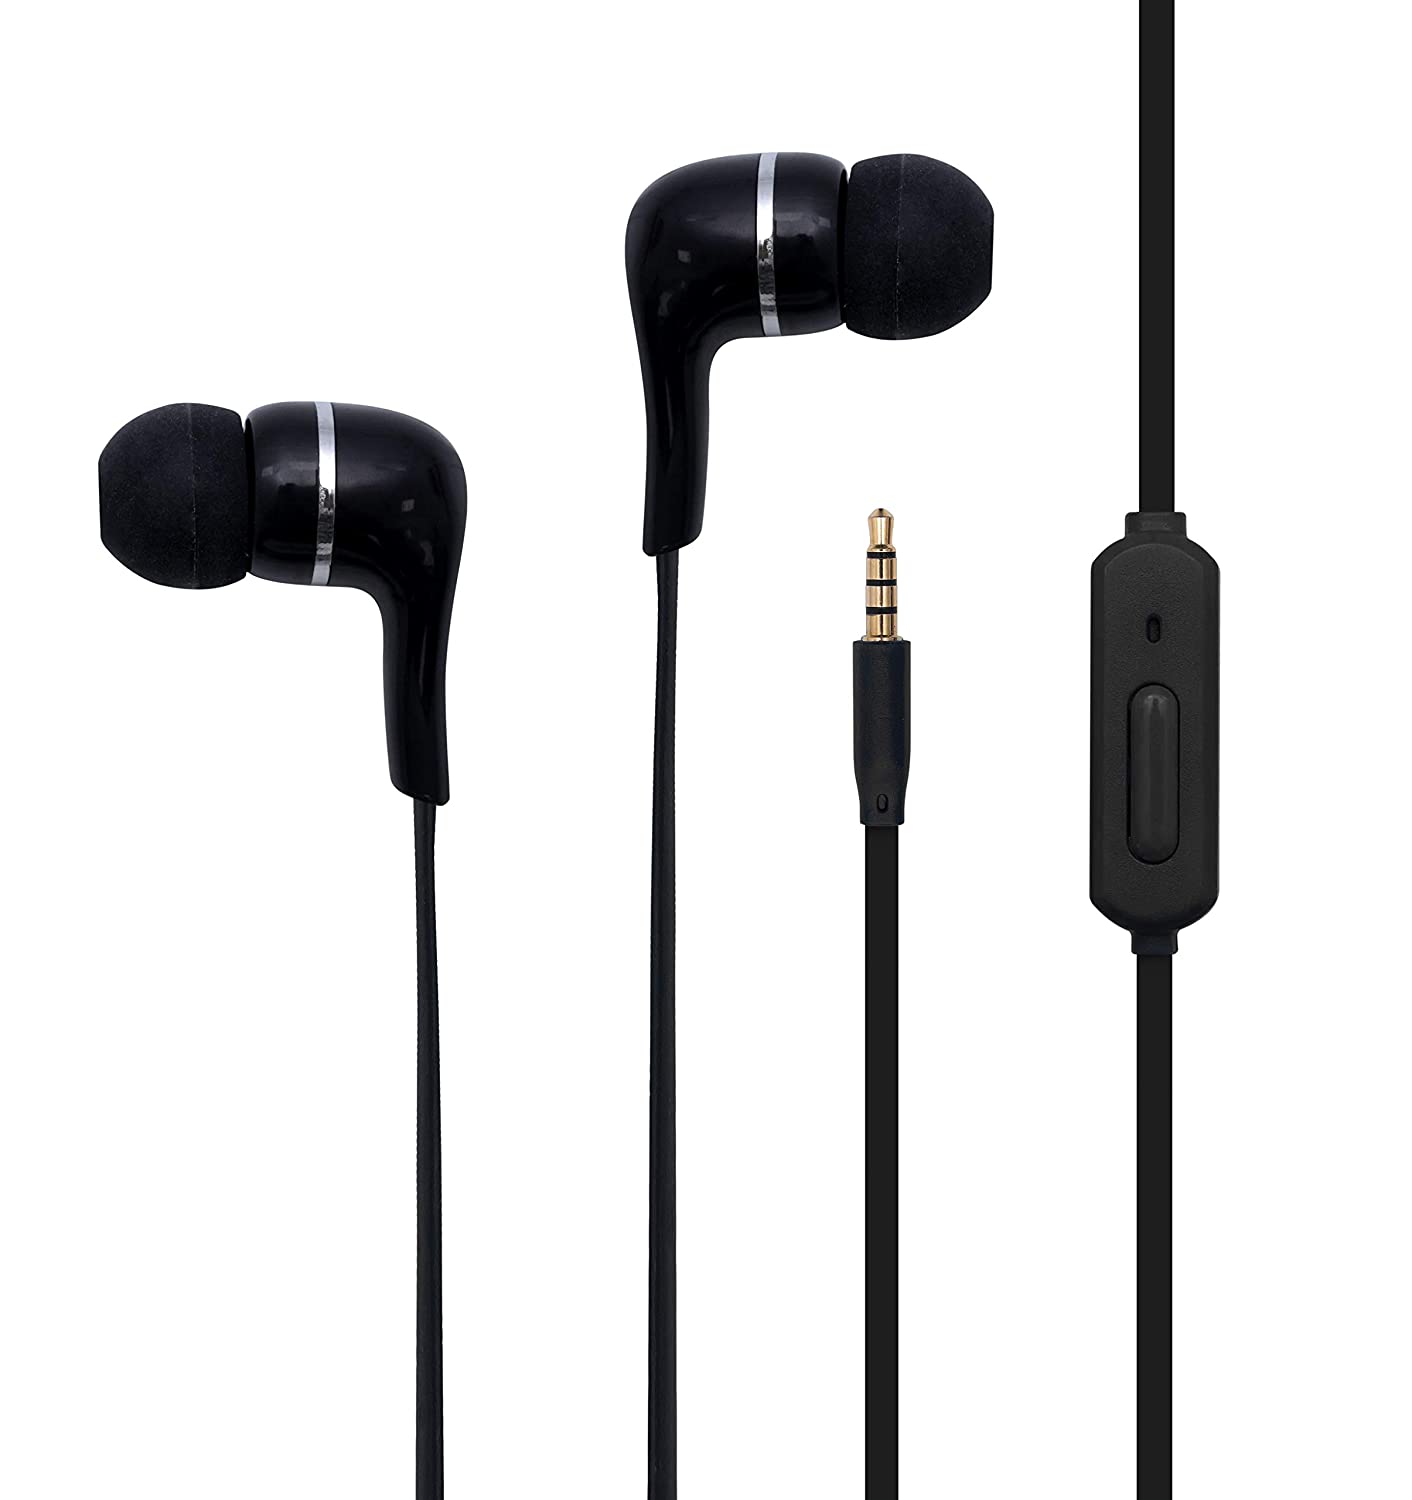 Toshiba Wired Earphones with Mic(RZE-D32E Black)